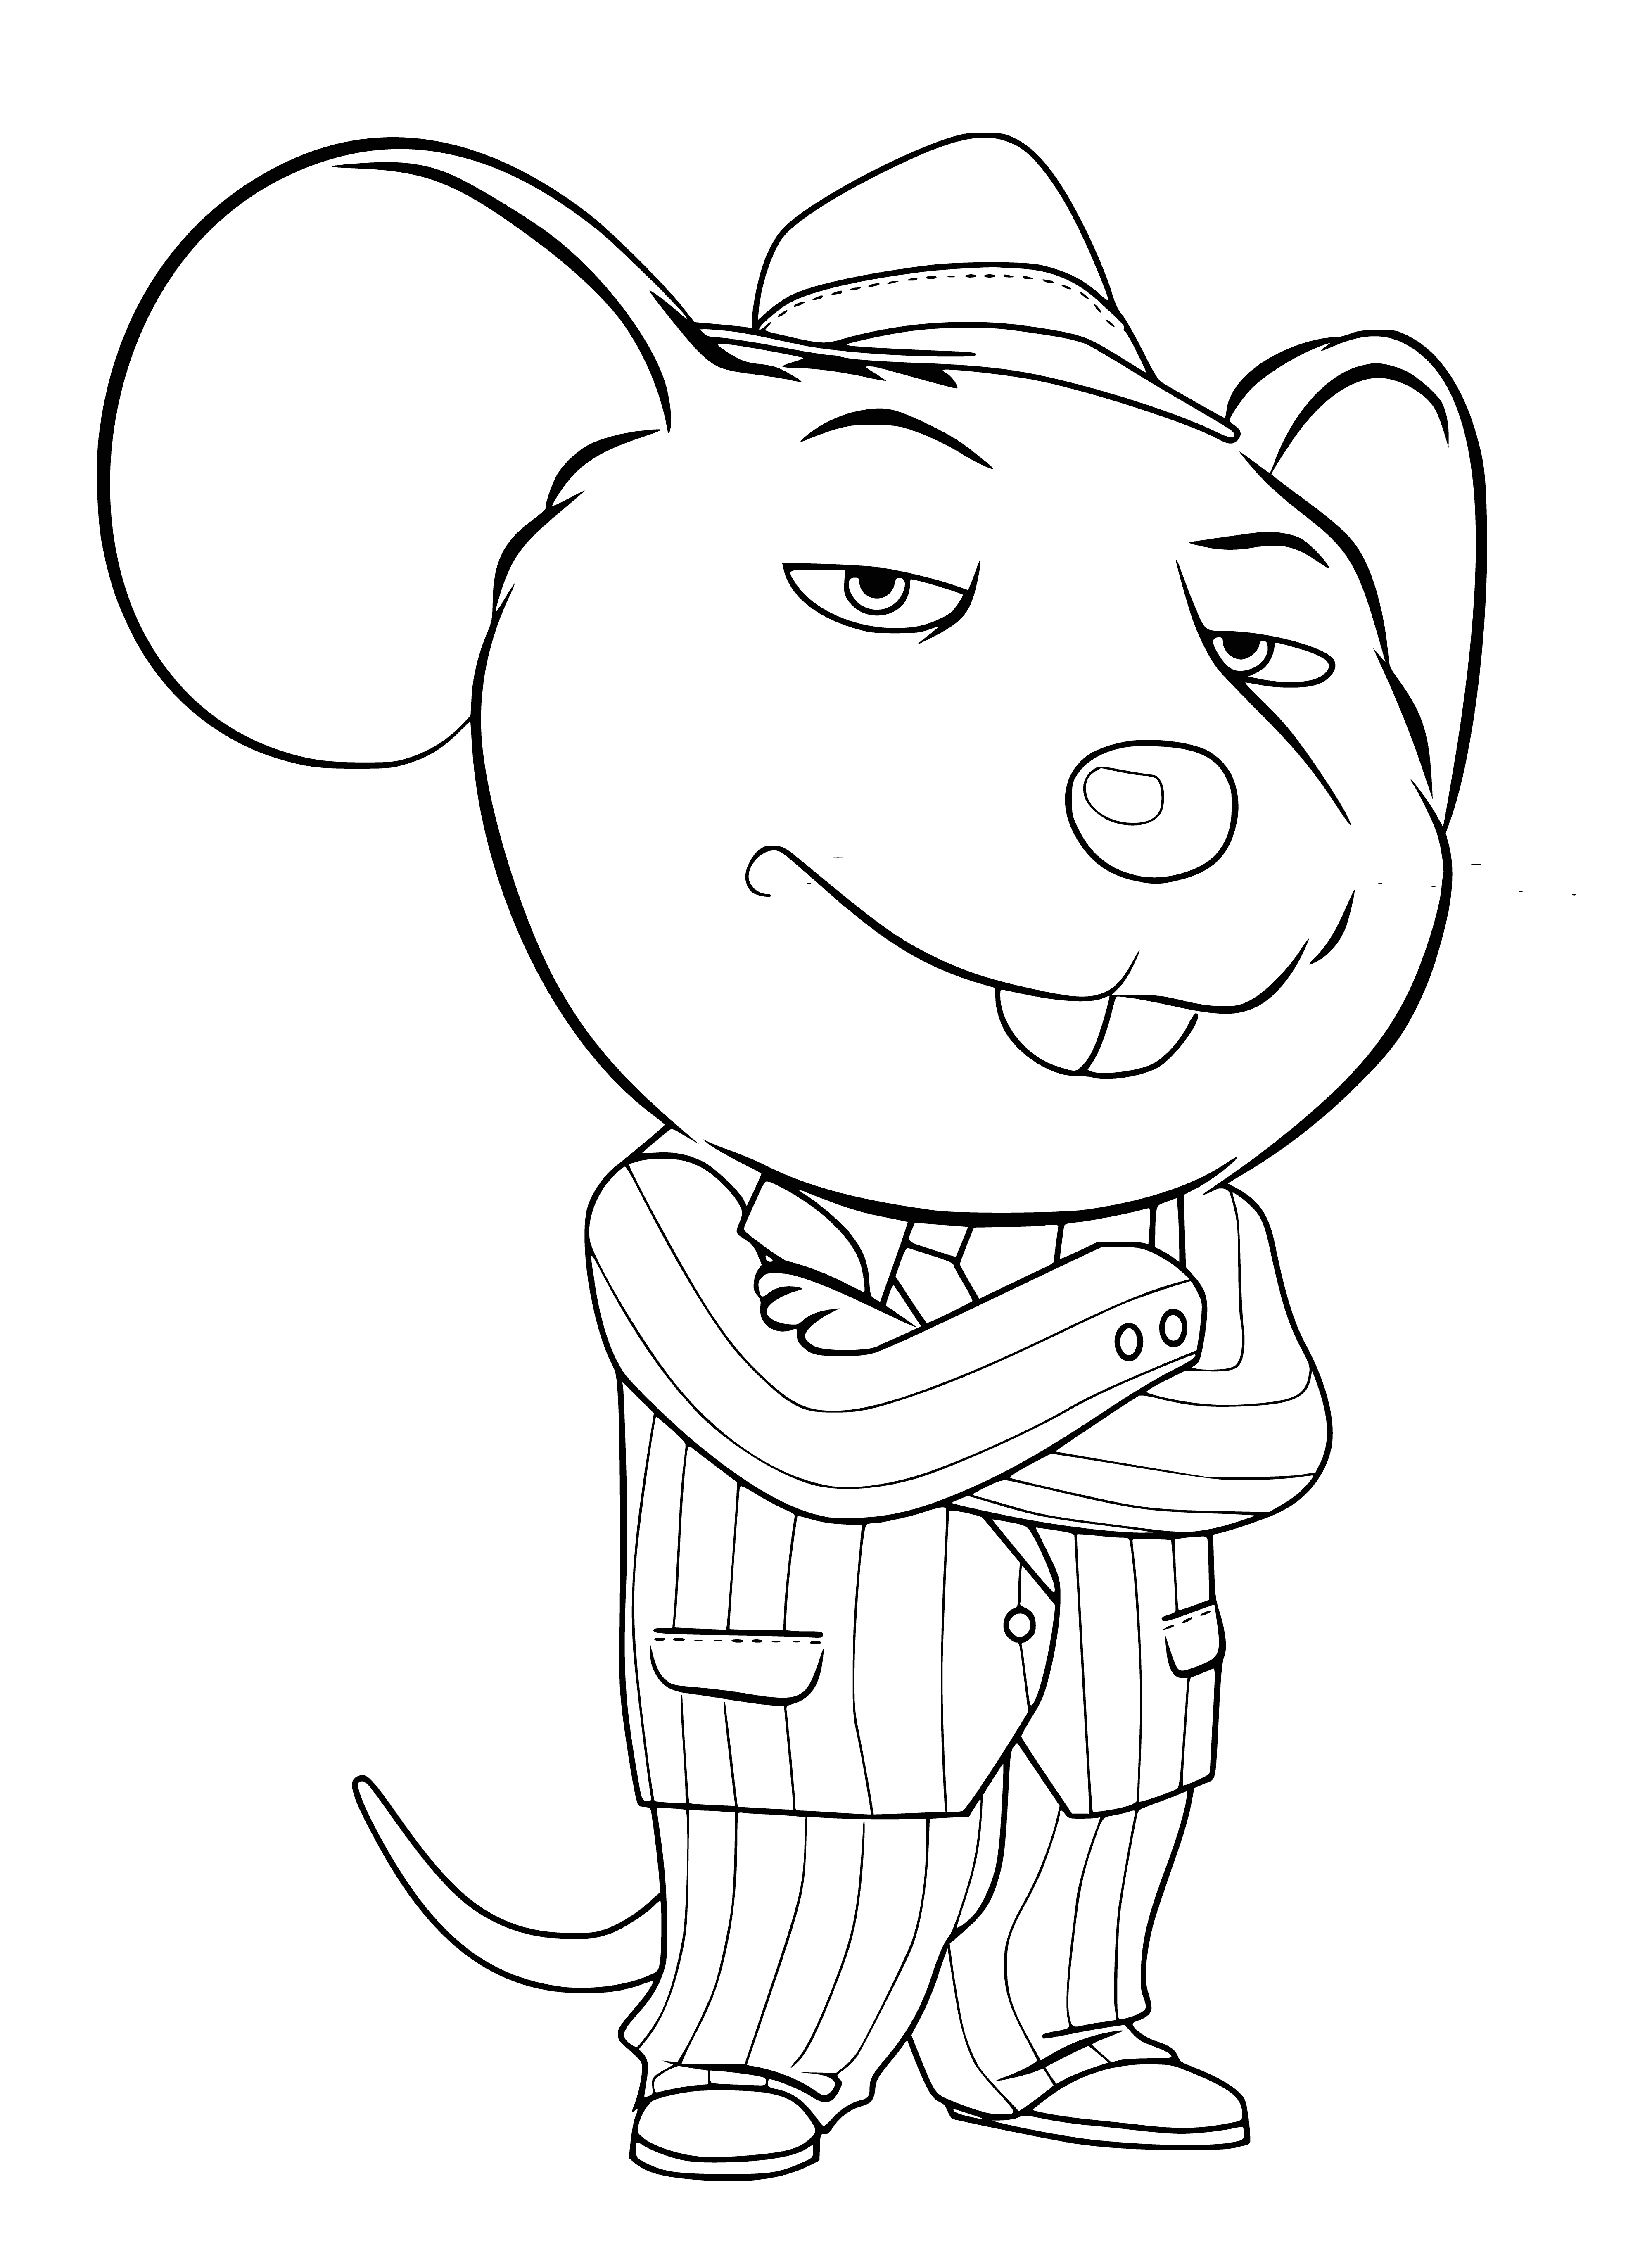 coloring page: Mouse wearing blue/white/red stands on green/brown rock, arm outstretched to viewer.